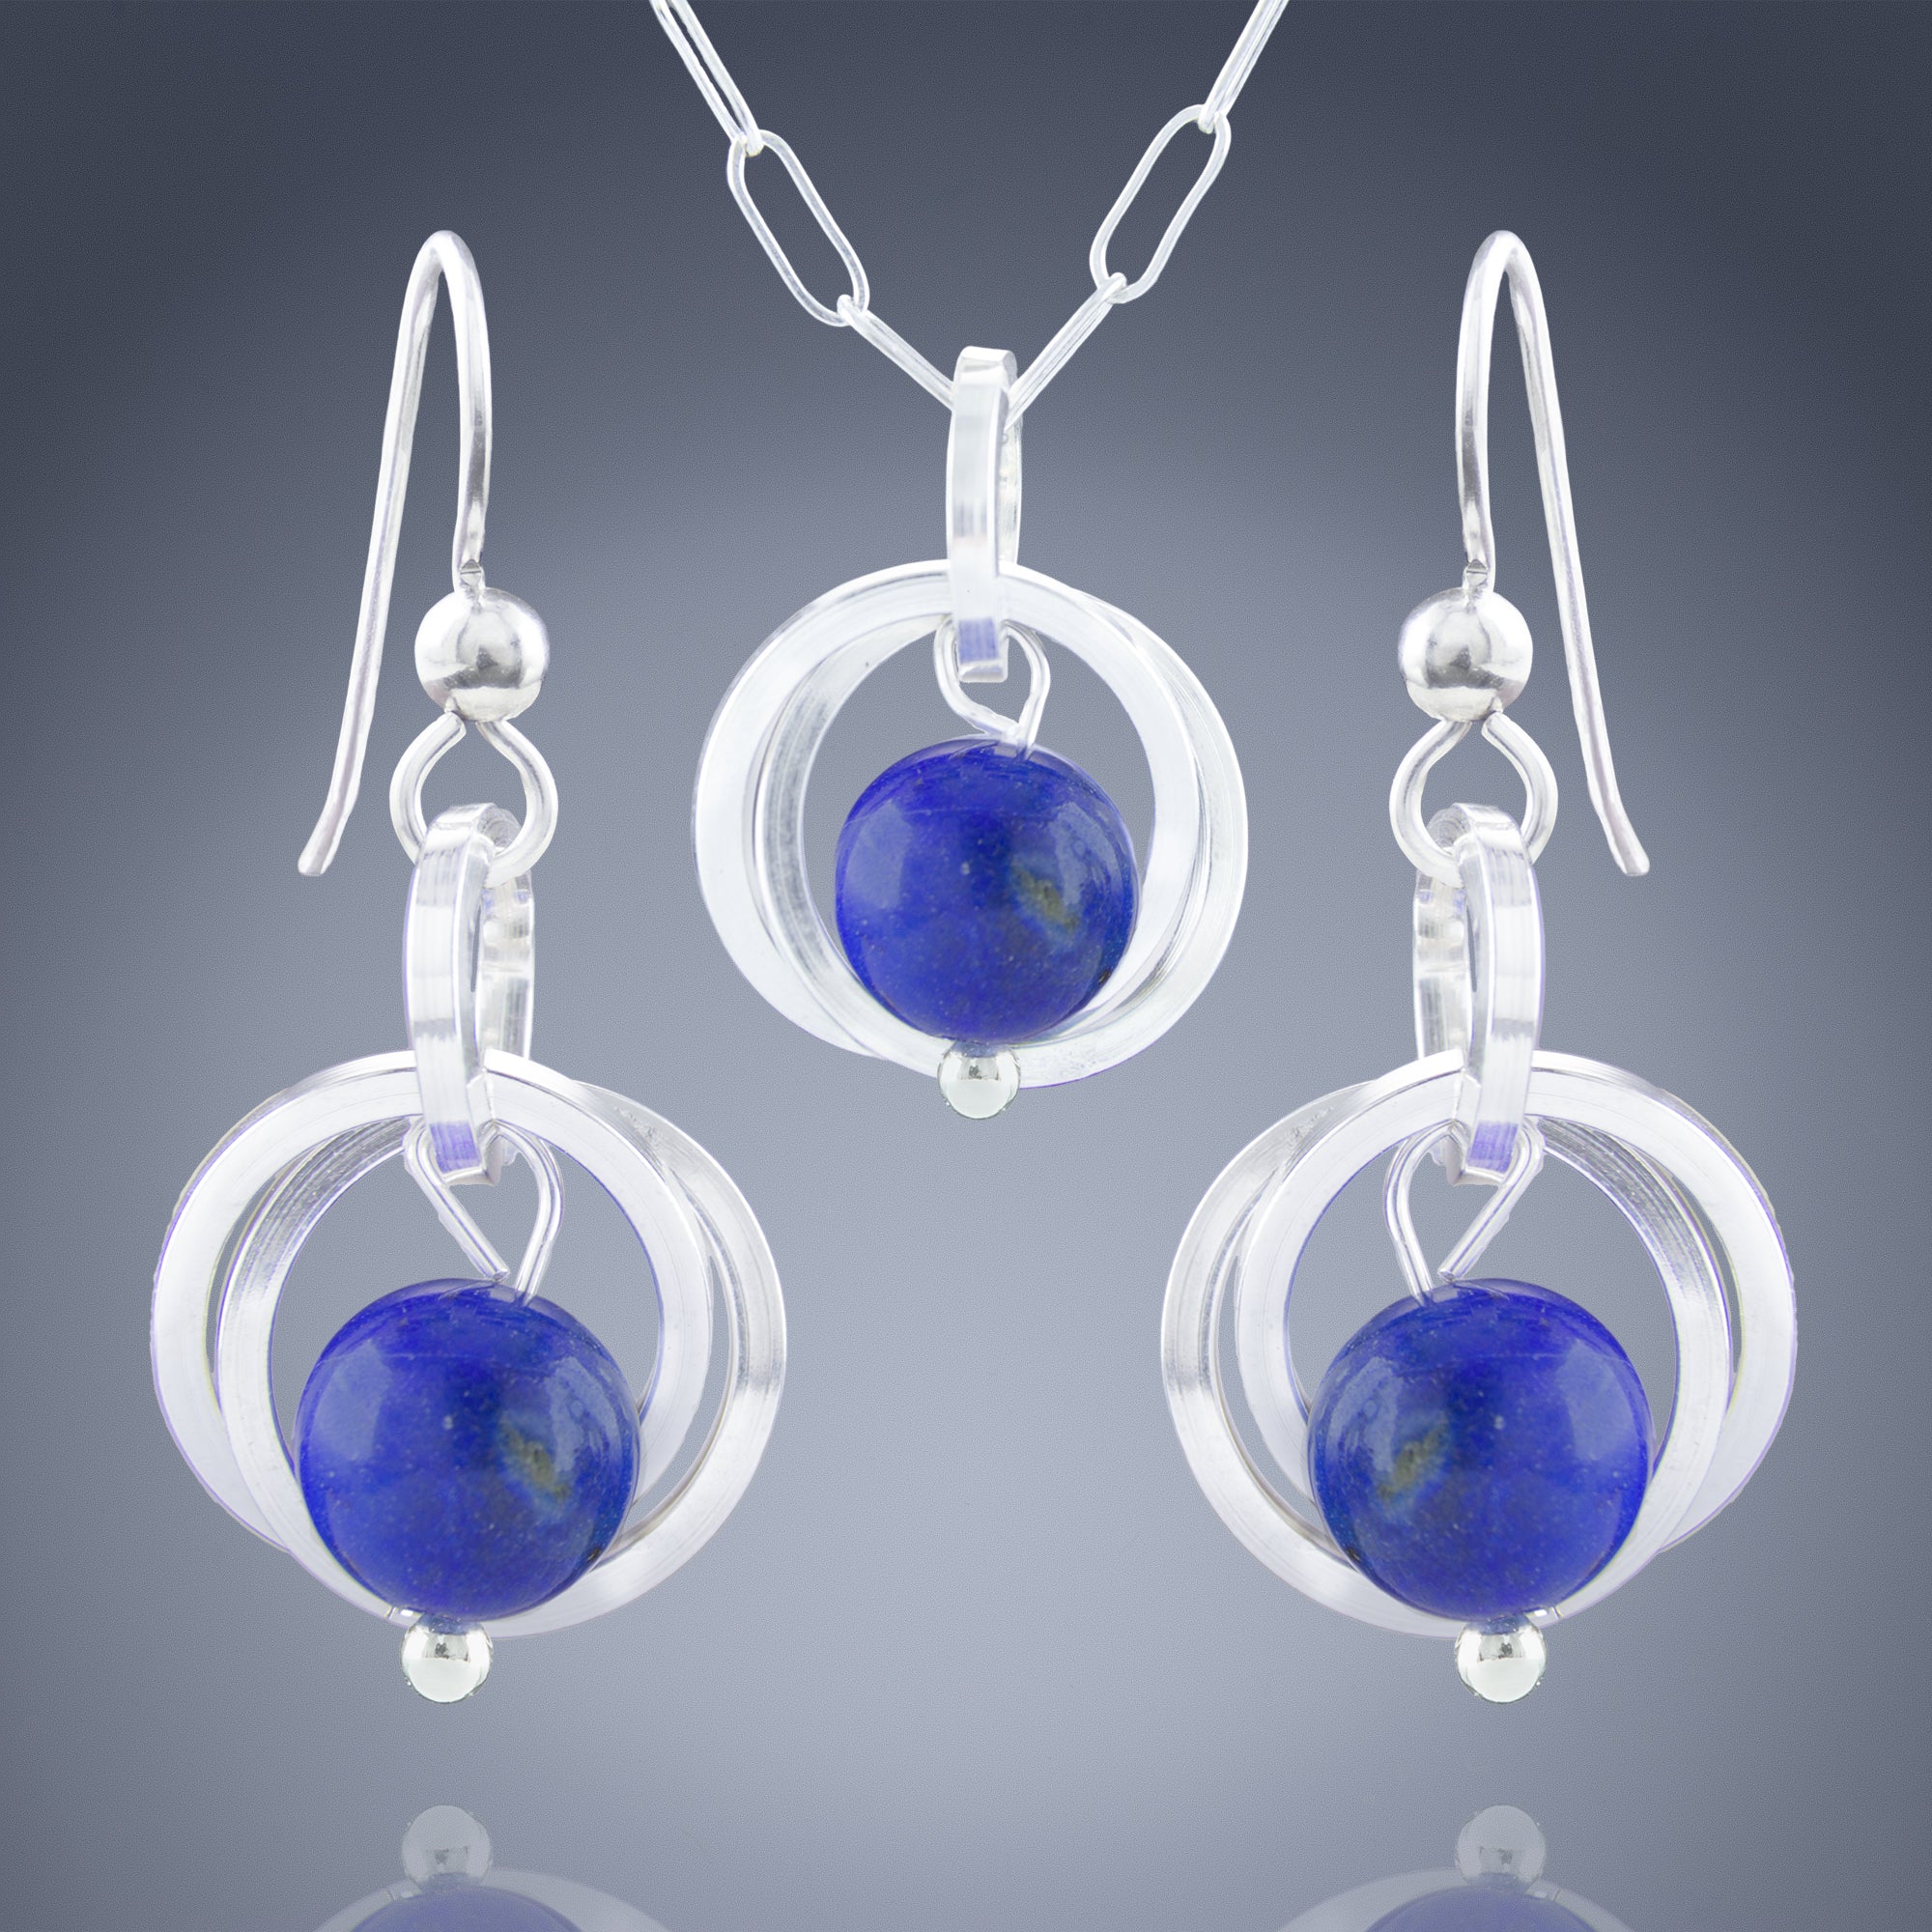 Royal Blue Lapis Lazuli Real Gemstone Simple Earring and Necklace Set in Argentium Sterling Silver